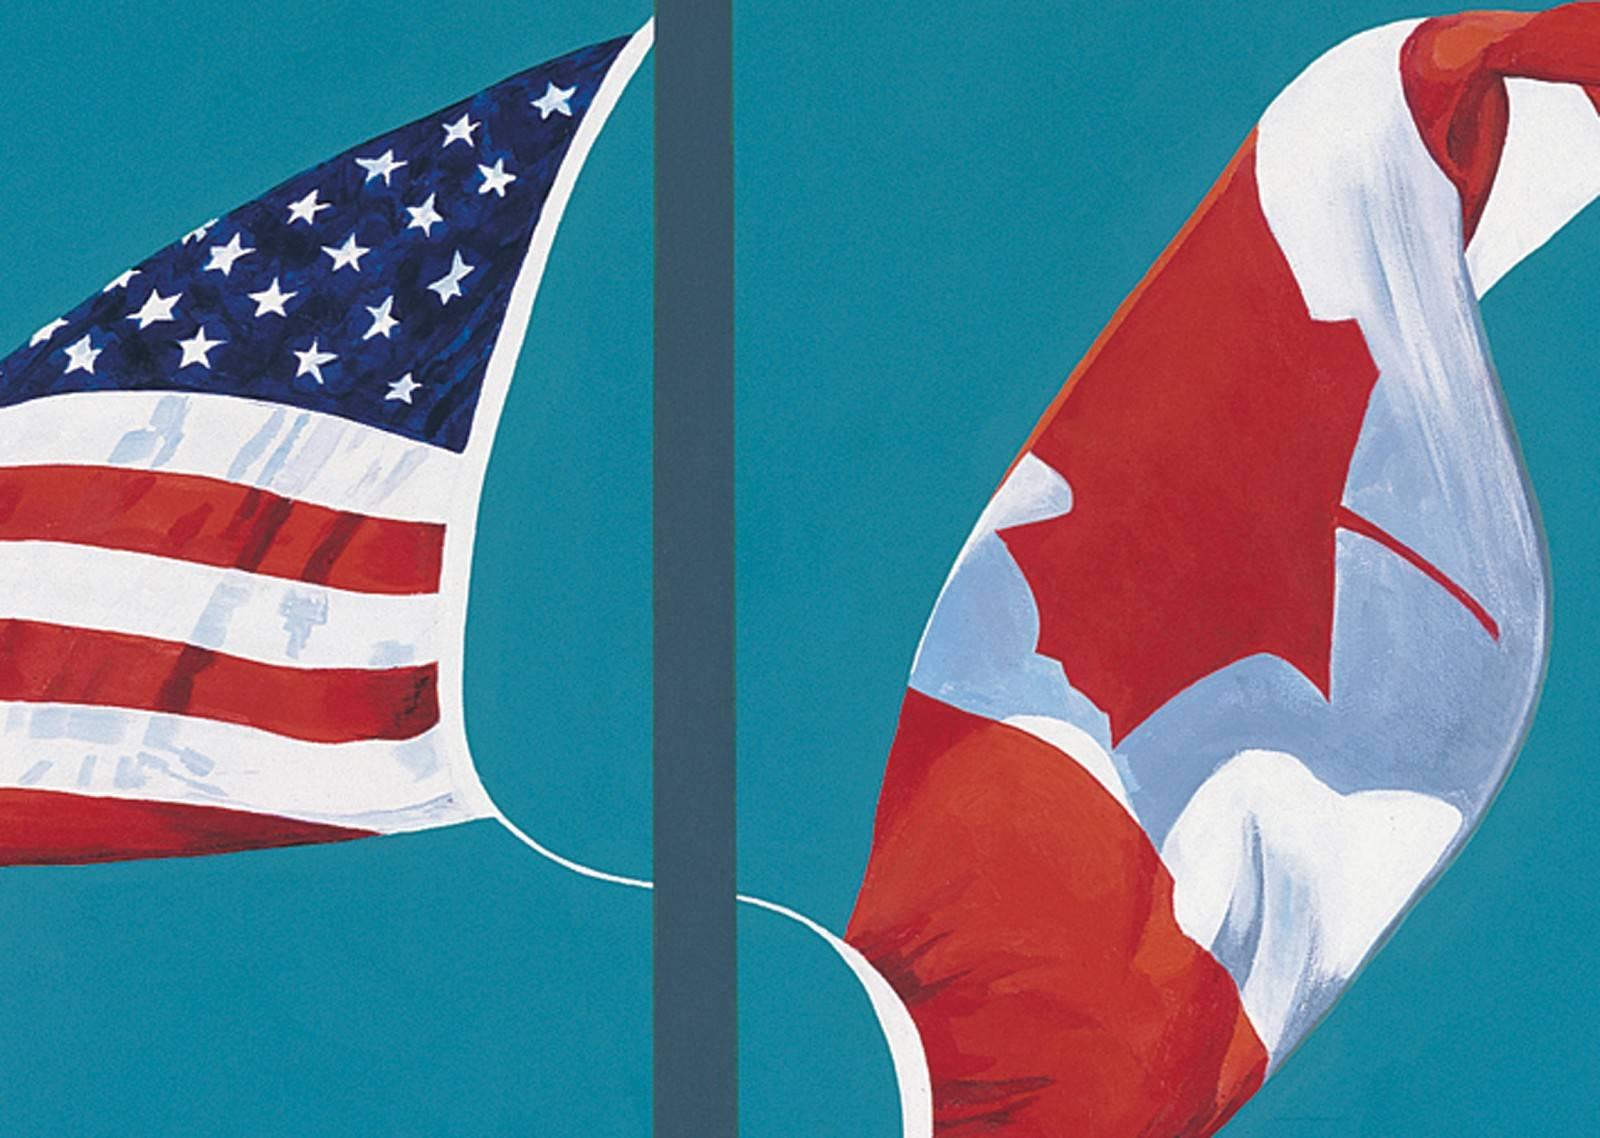 Side By Side 6/8 - bright, colourful, political, flag, Canada, USA, giclée print - Print by Charles Pachter